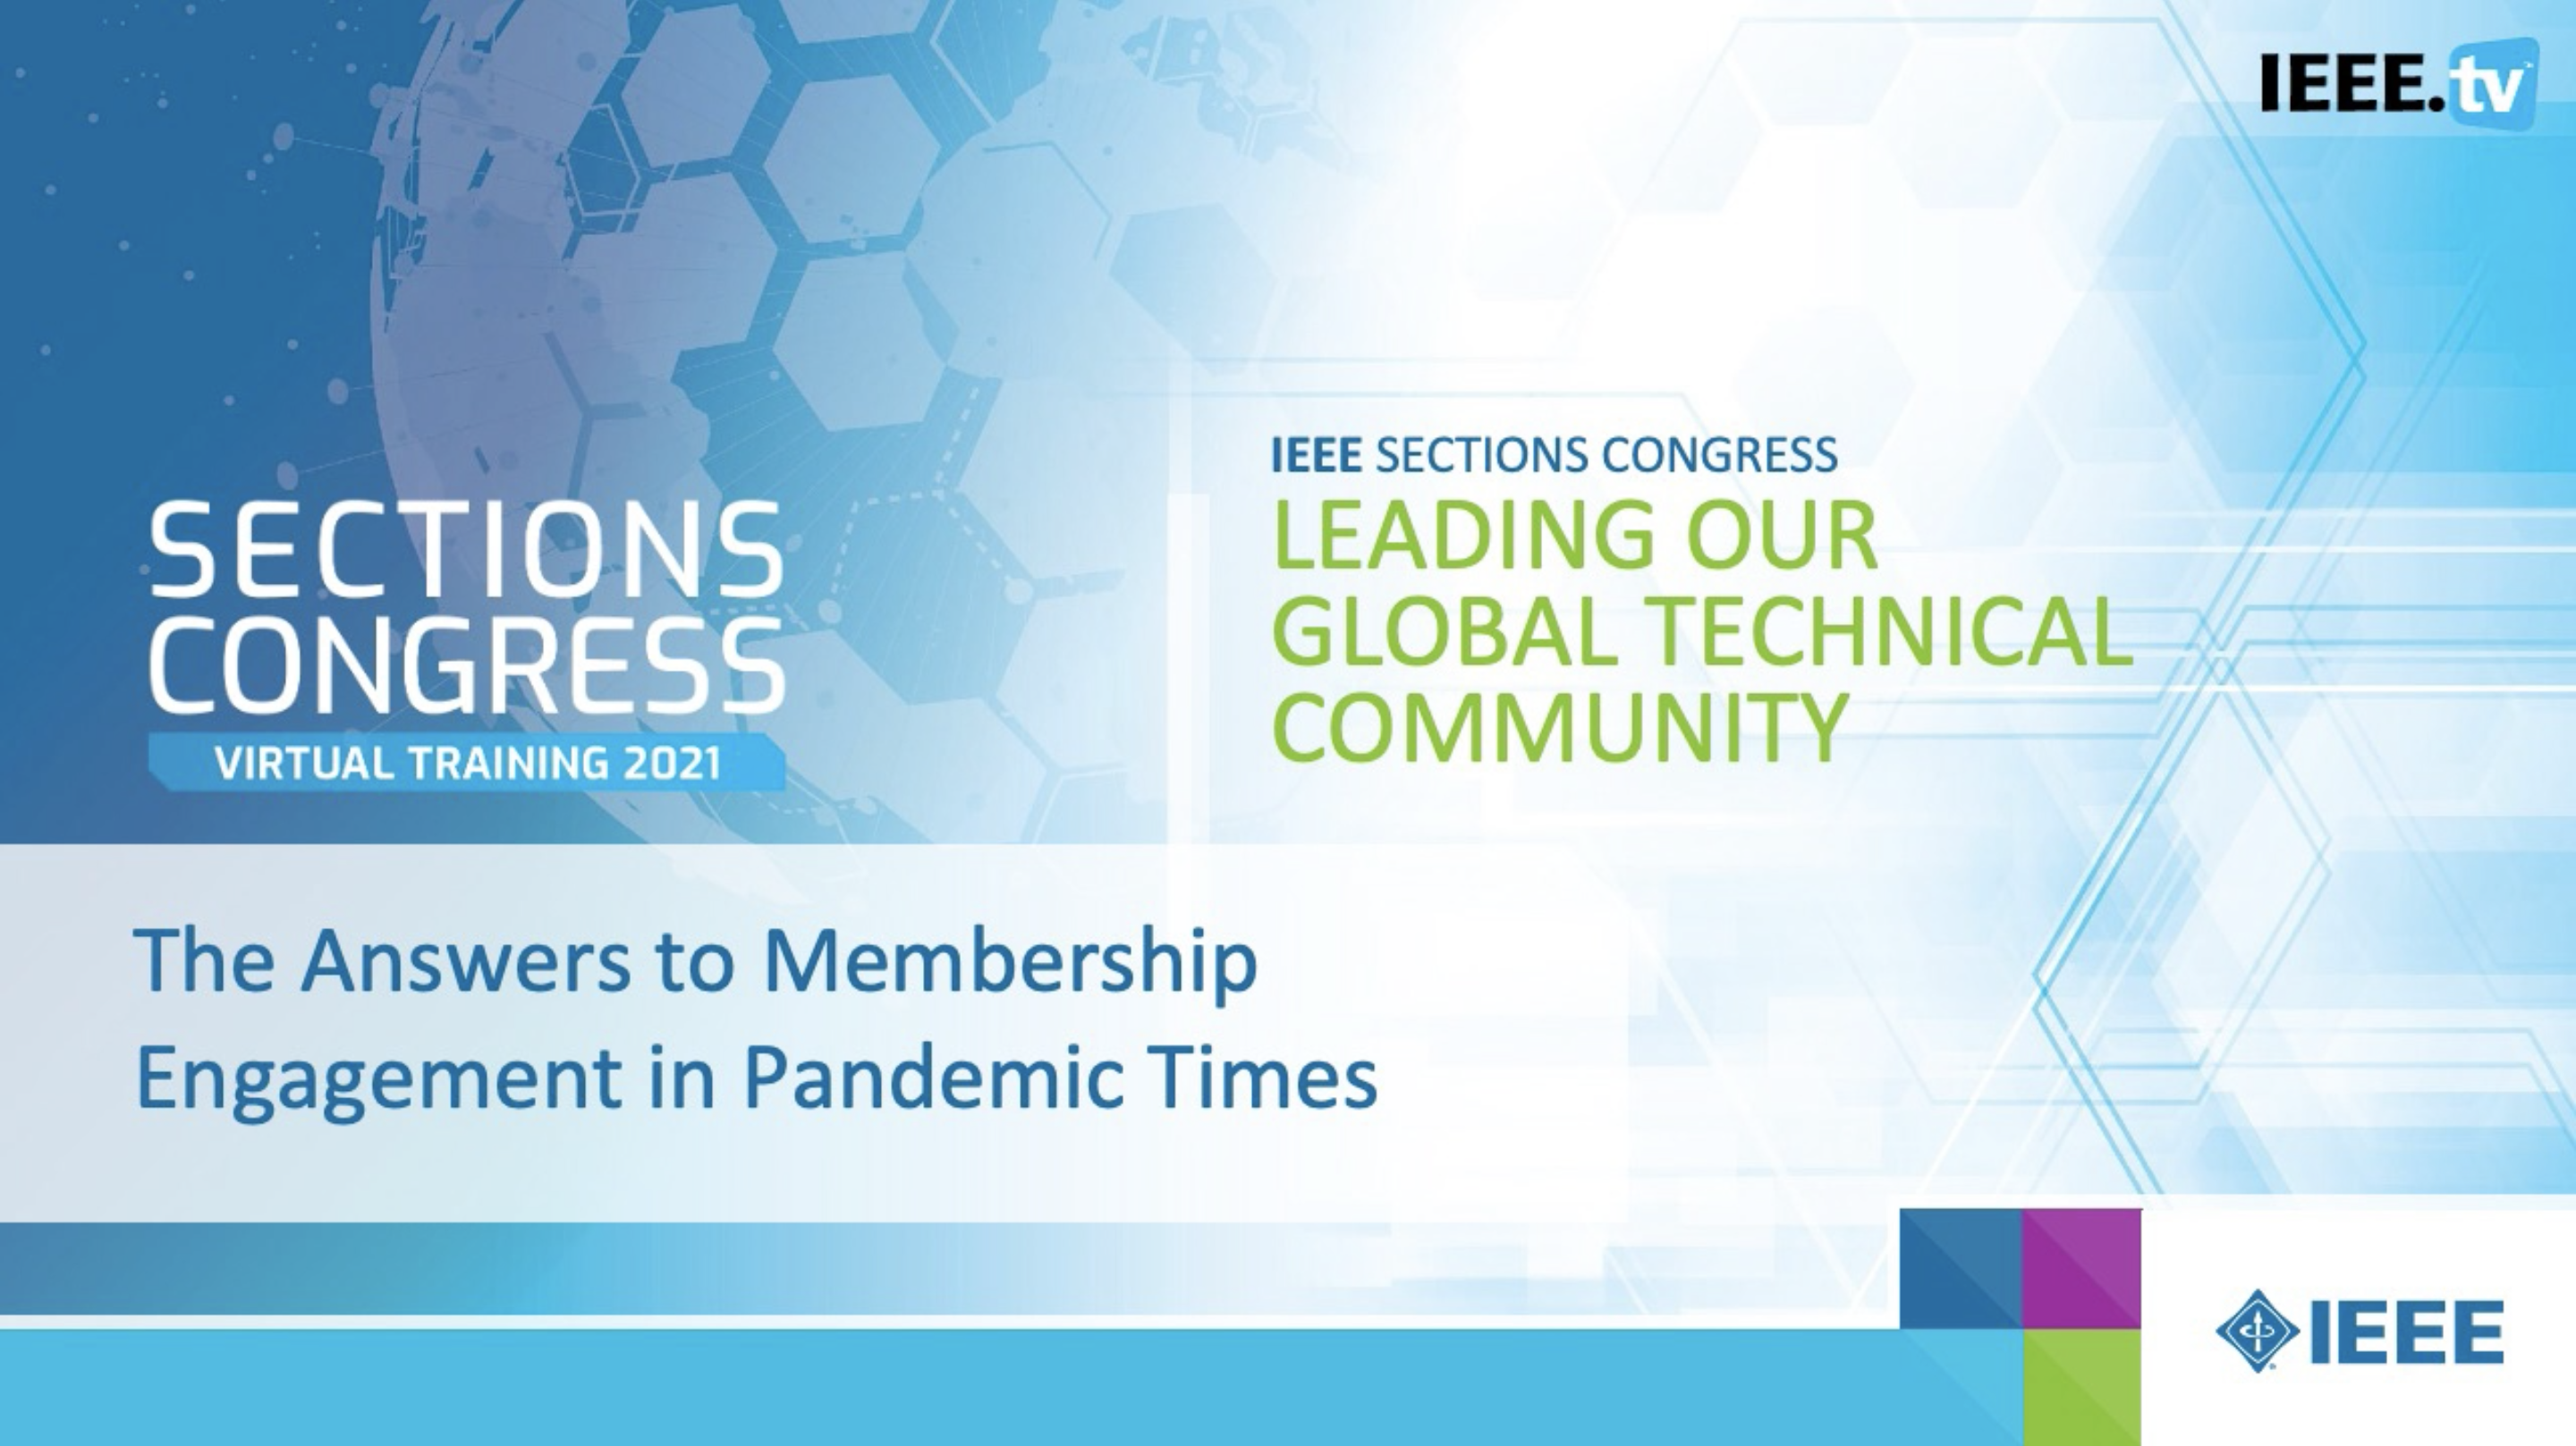 The Answers to Membership Engagement in Pandemic Times